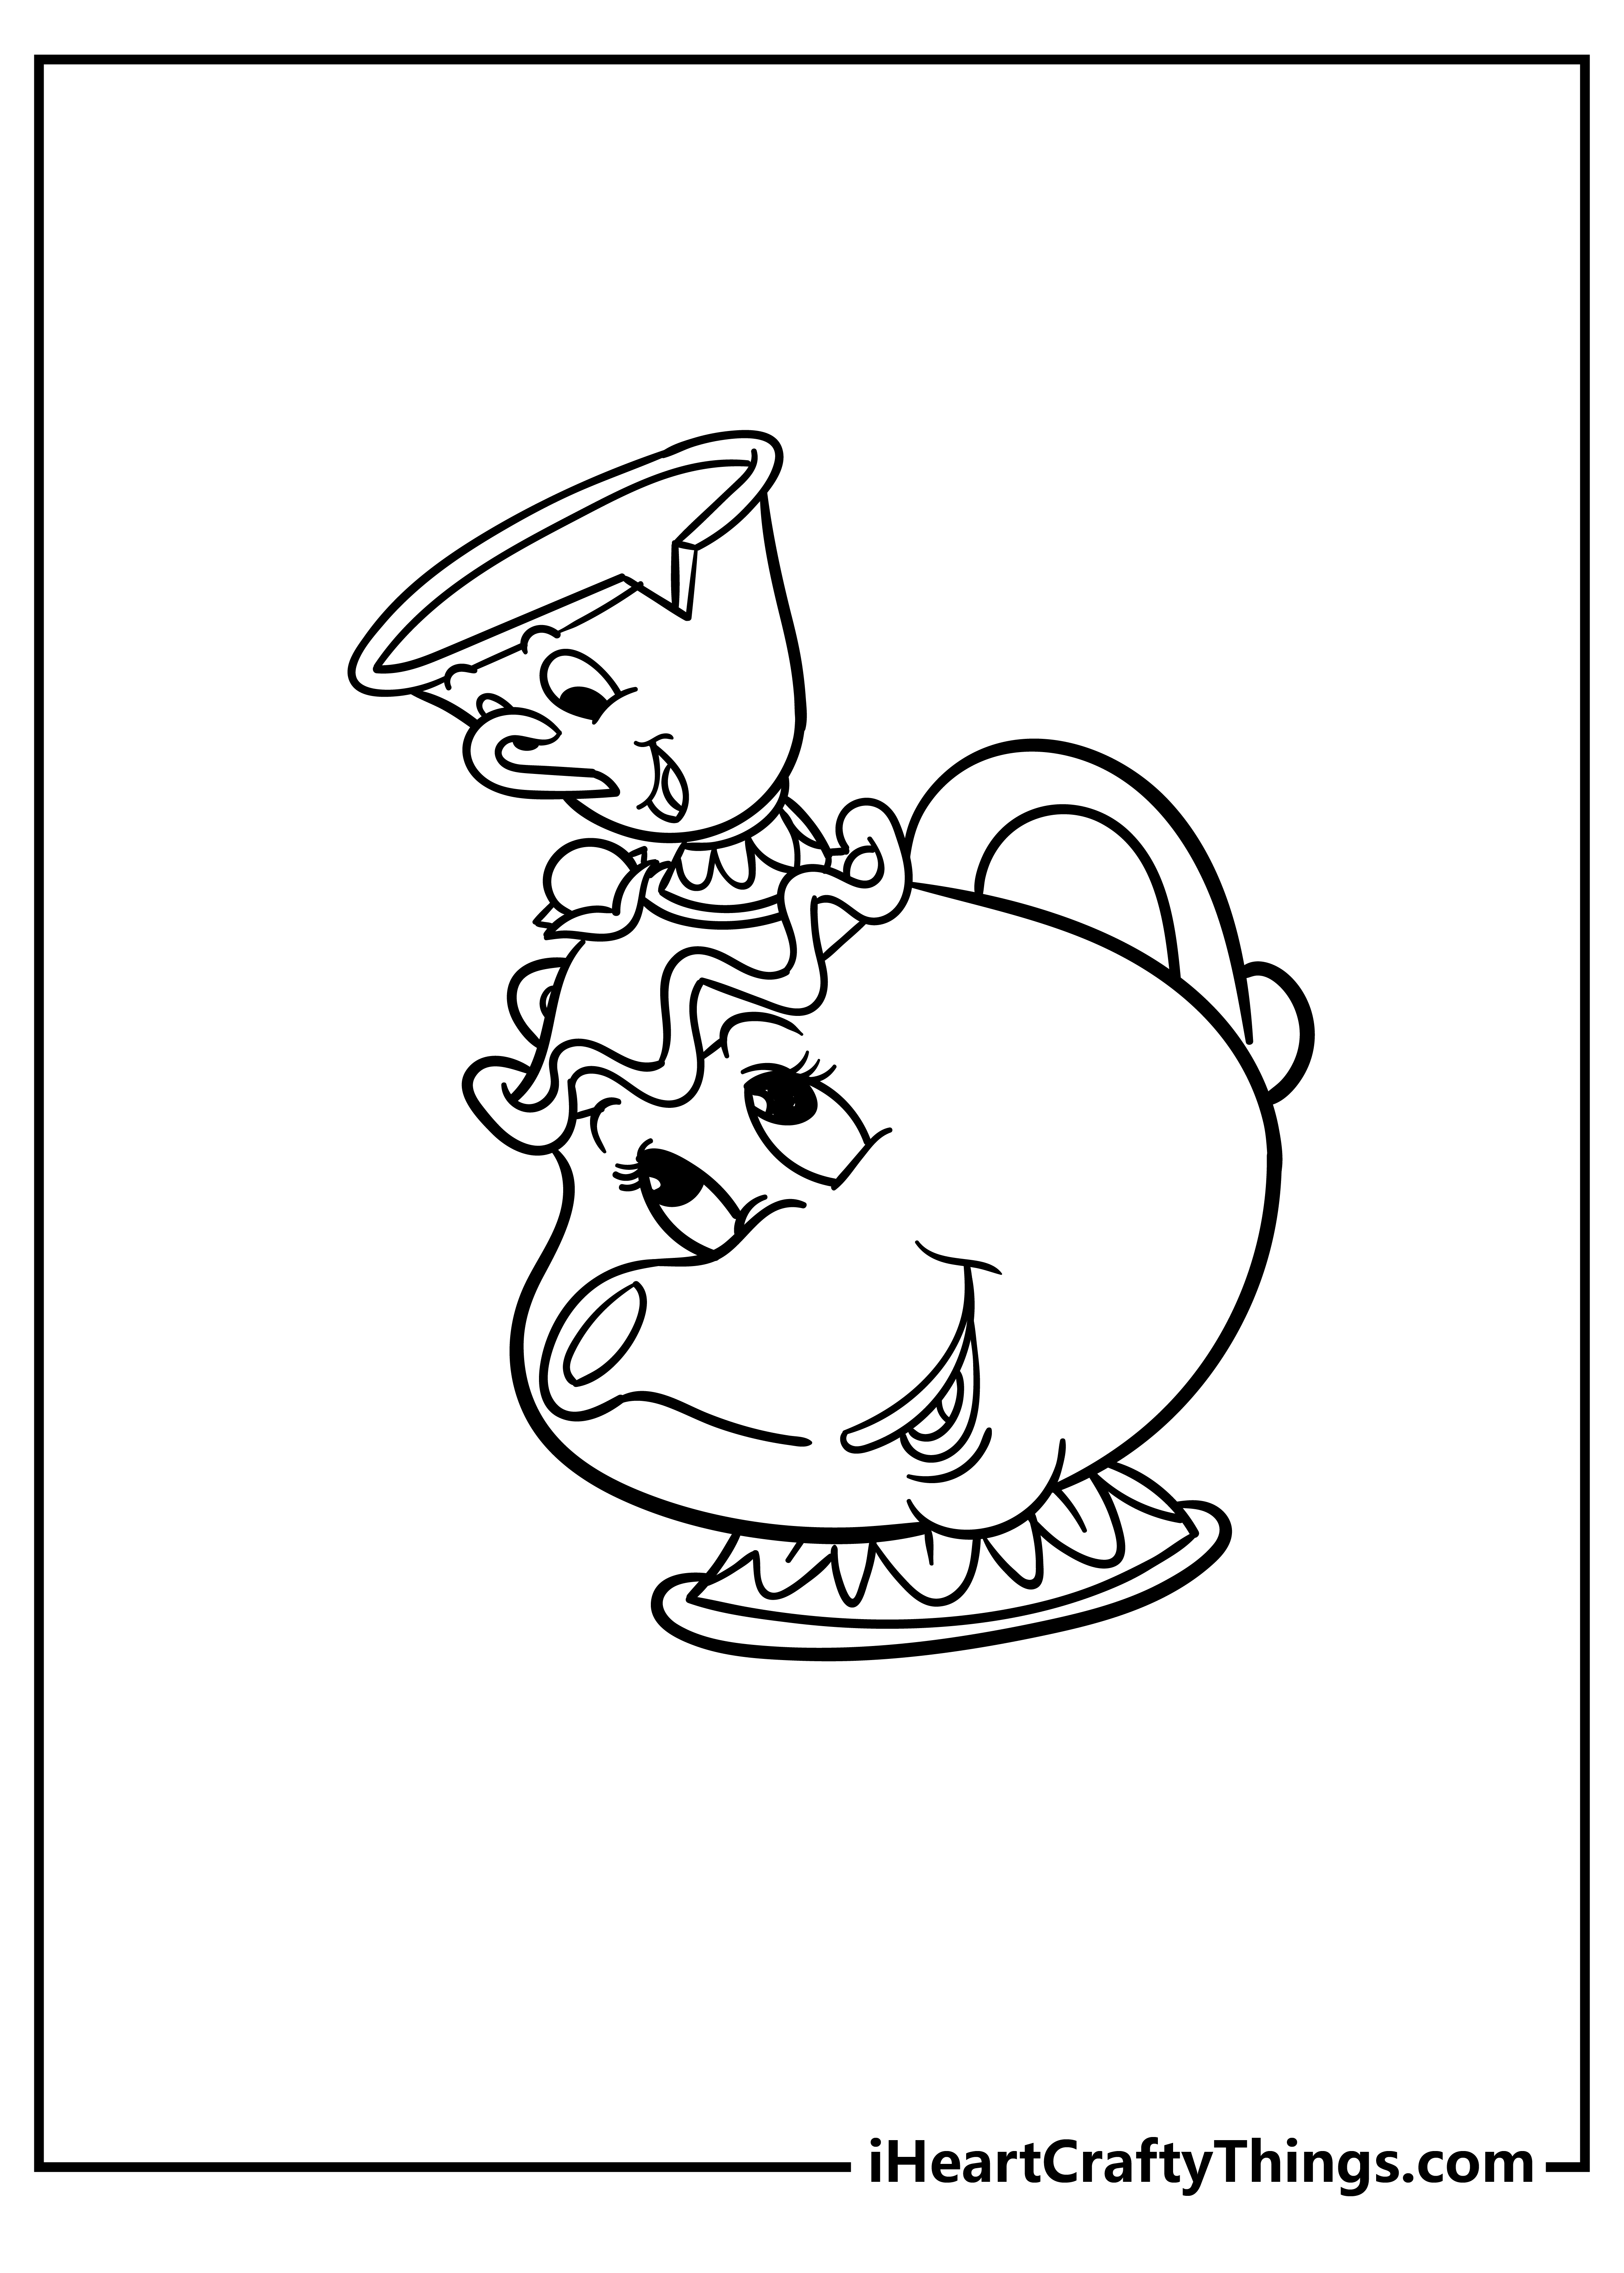 Beauty and the Beast Coloring Sheet for children free download